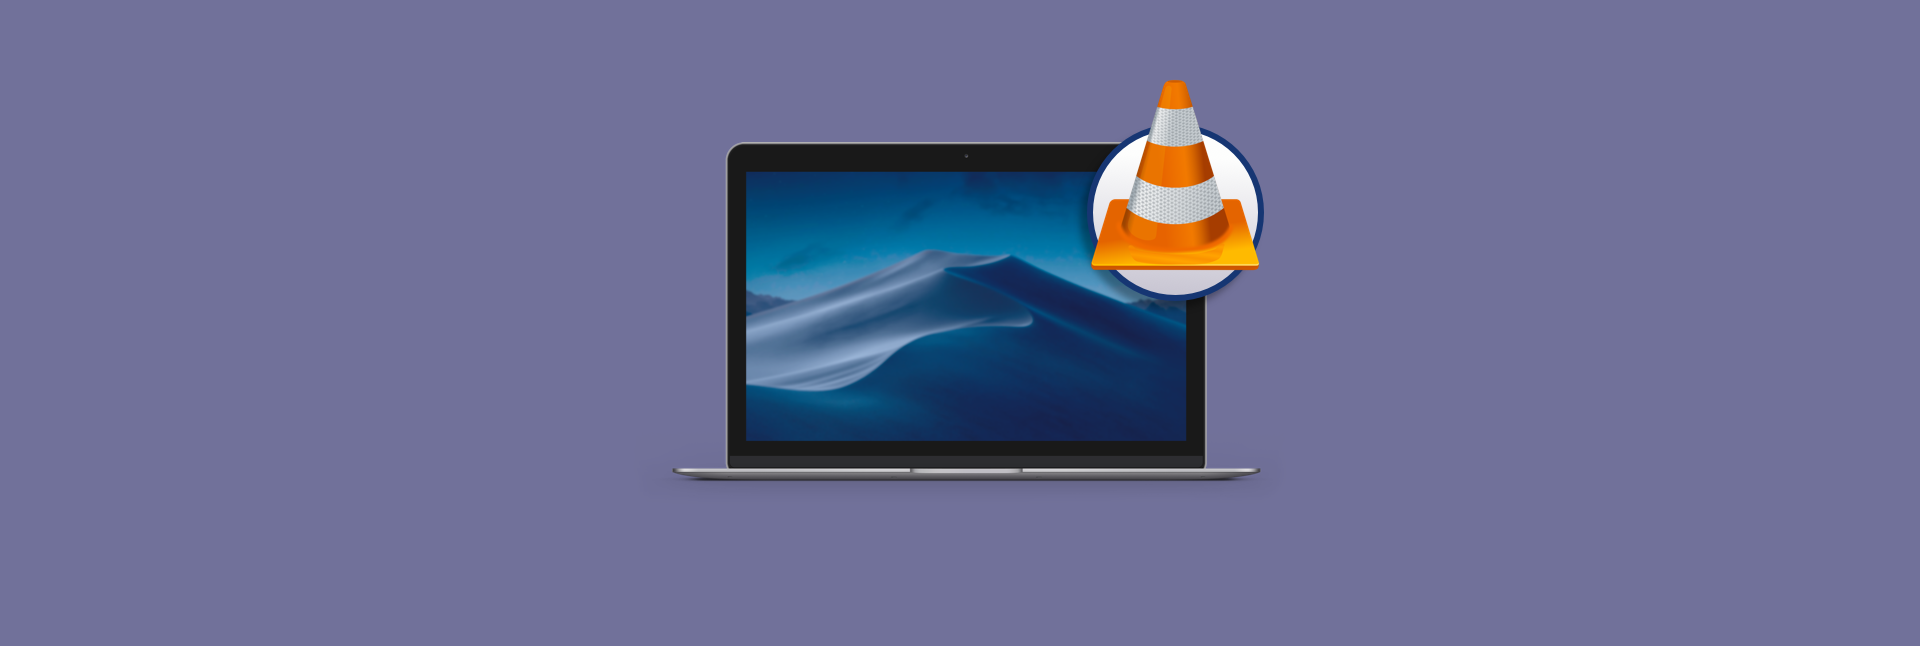 Vlc media player for mac free download